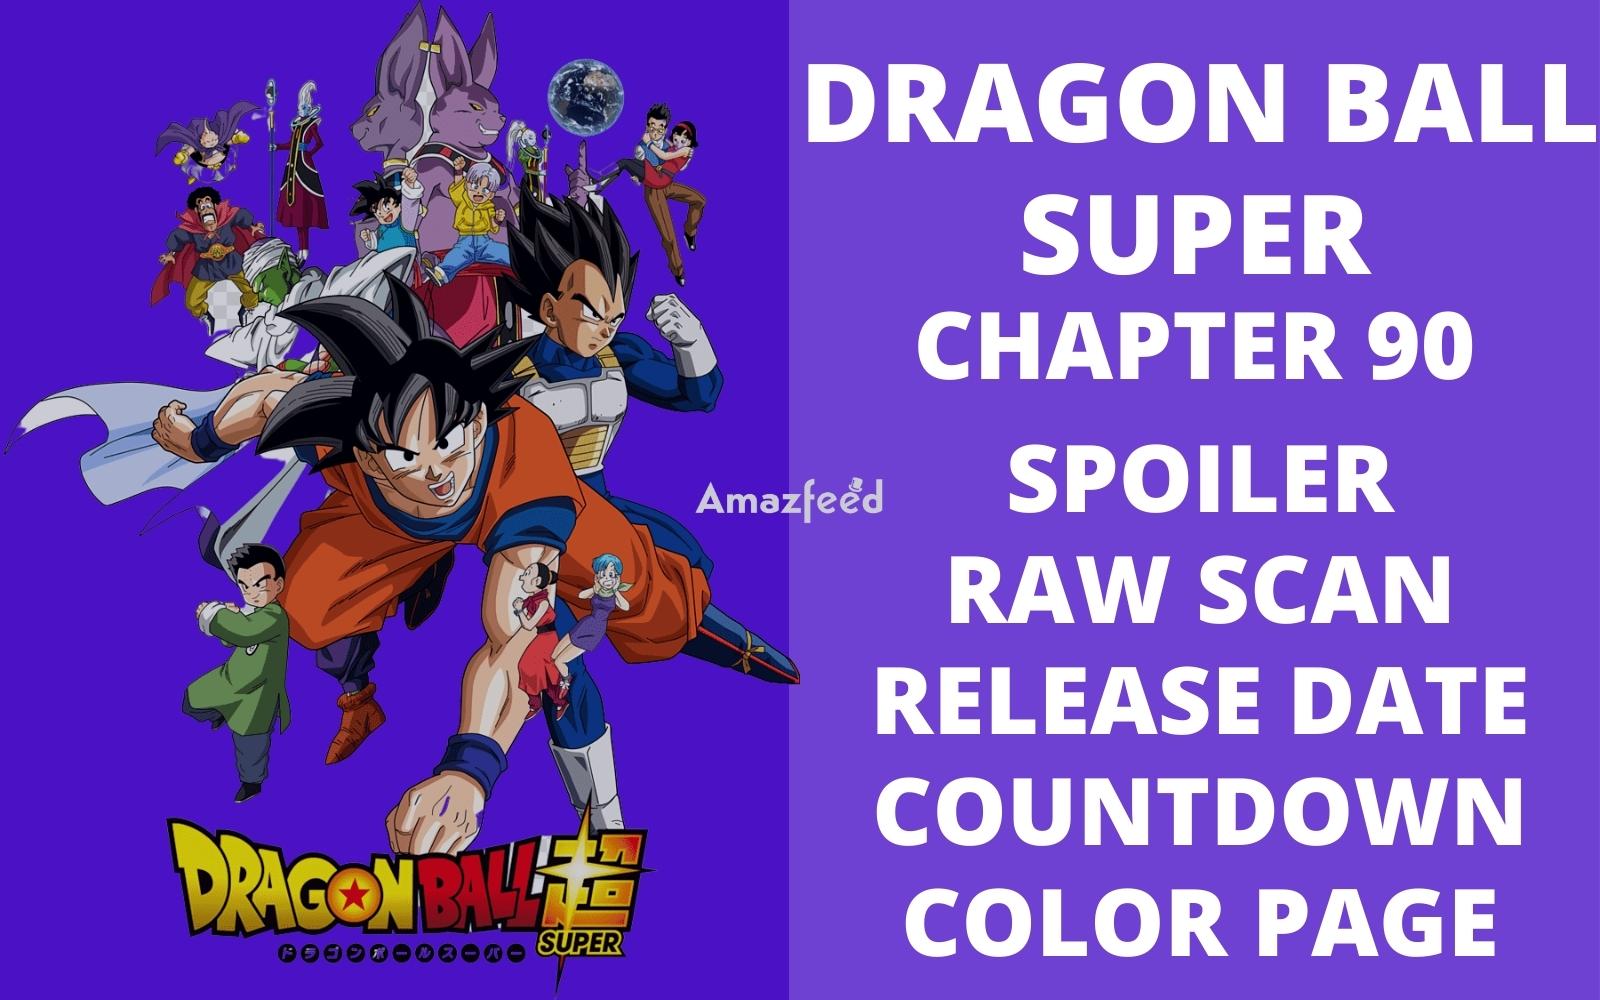 Dragon Ball Super Chapter 90 Spoiler, Raw Scan, Color Page, Release Date